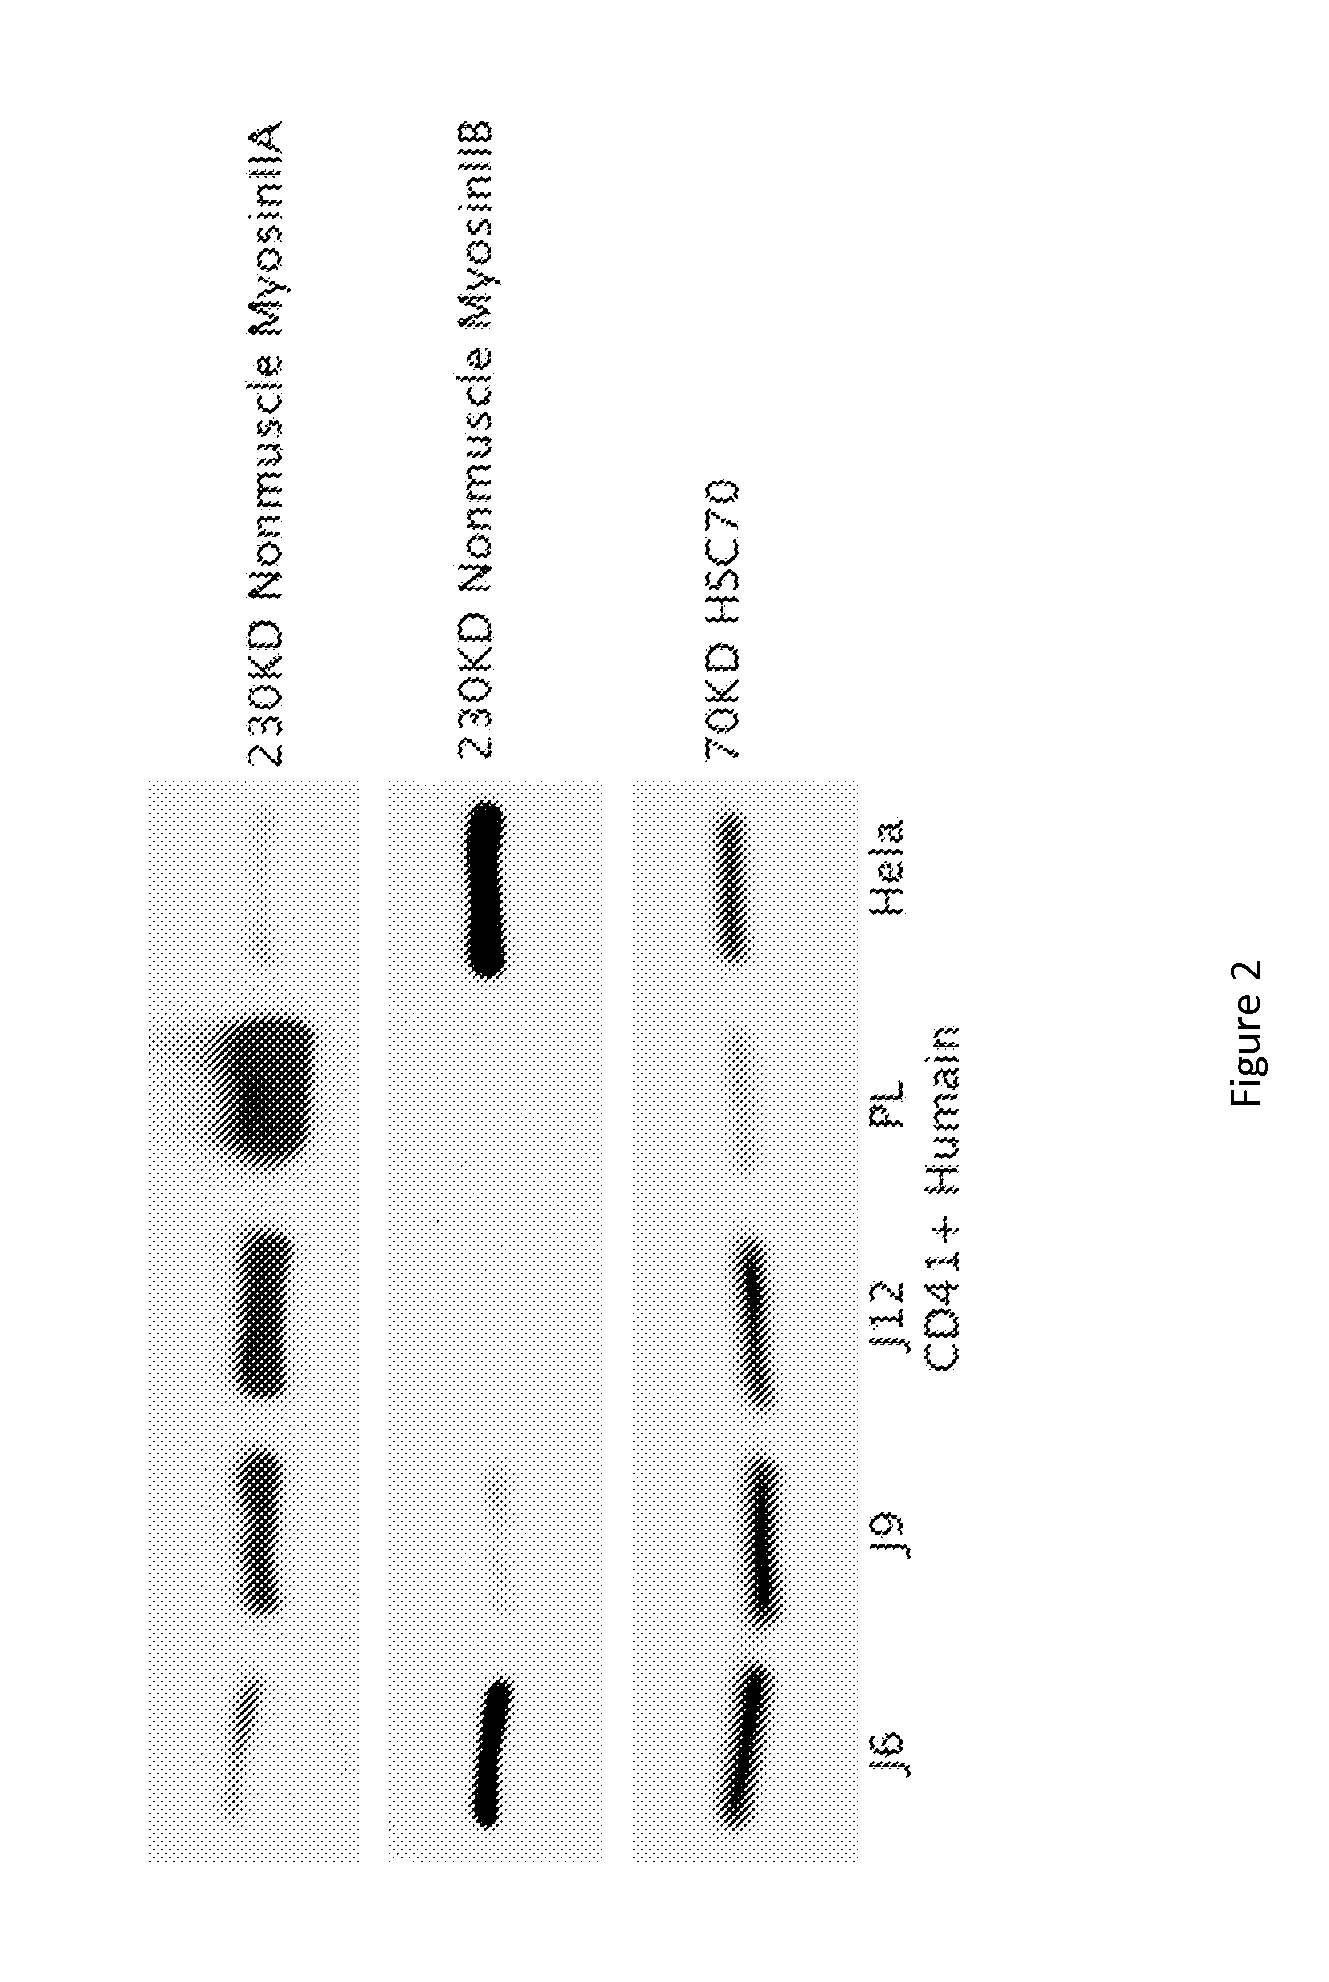 Myh10 as a new marker of pathologies resulting from runx1 inactivation